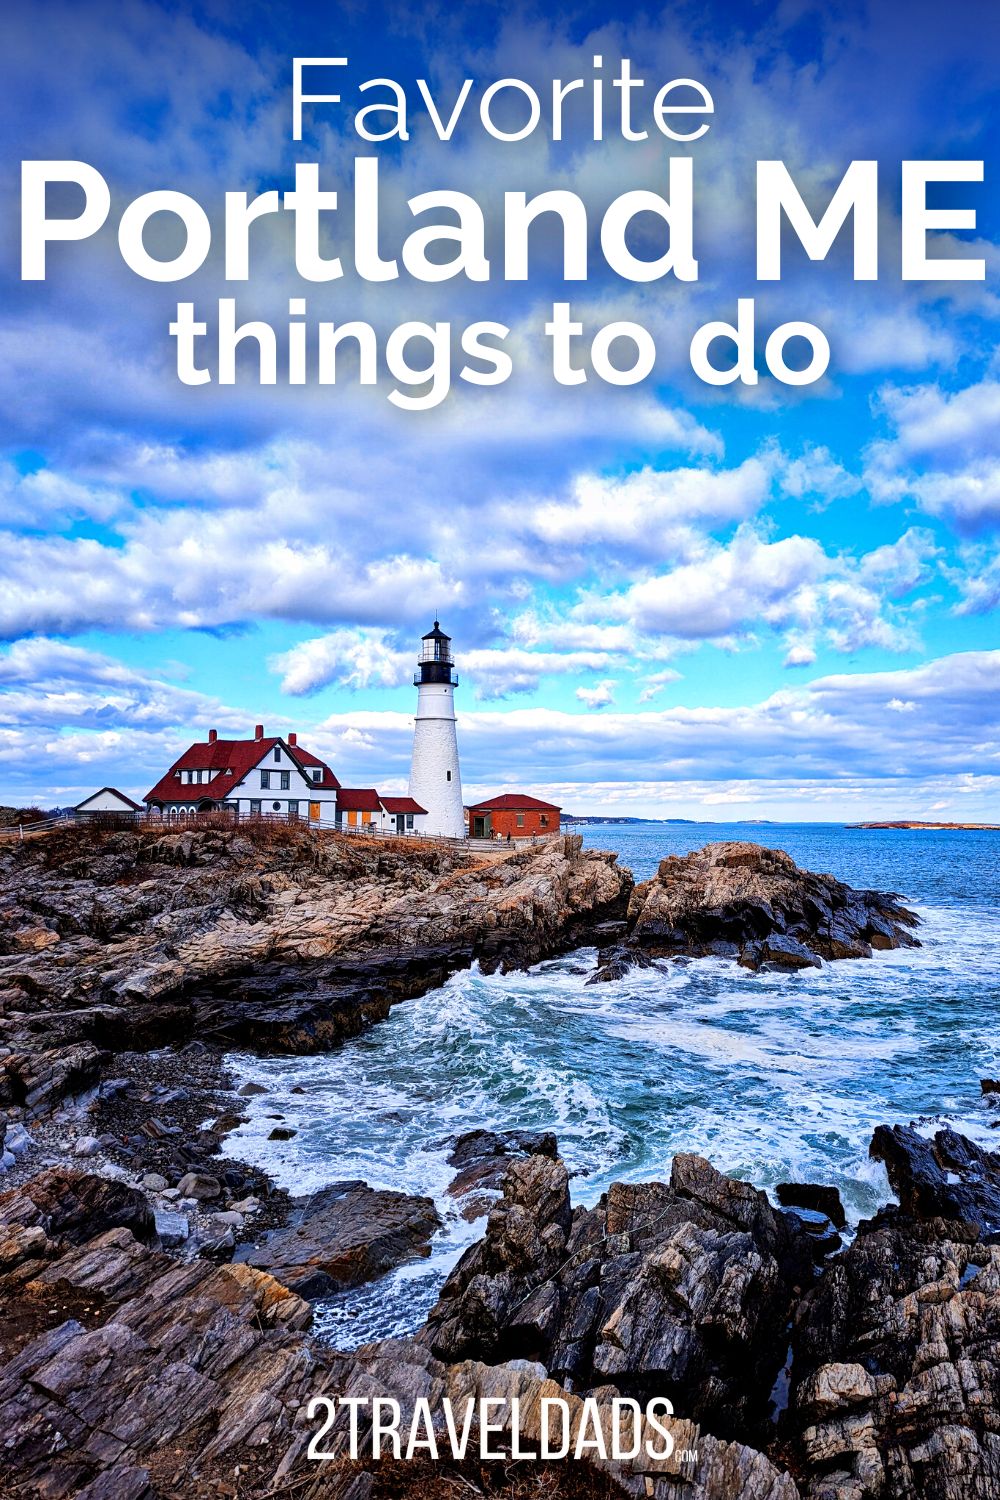 There are lots of fun things to do in Portland, Maine with kids. We've spent a lot of time there and have our favorite sights and activities. From lighthouses to grilled cheese, these are our picks for things to do in Portland.